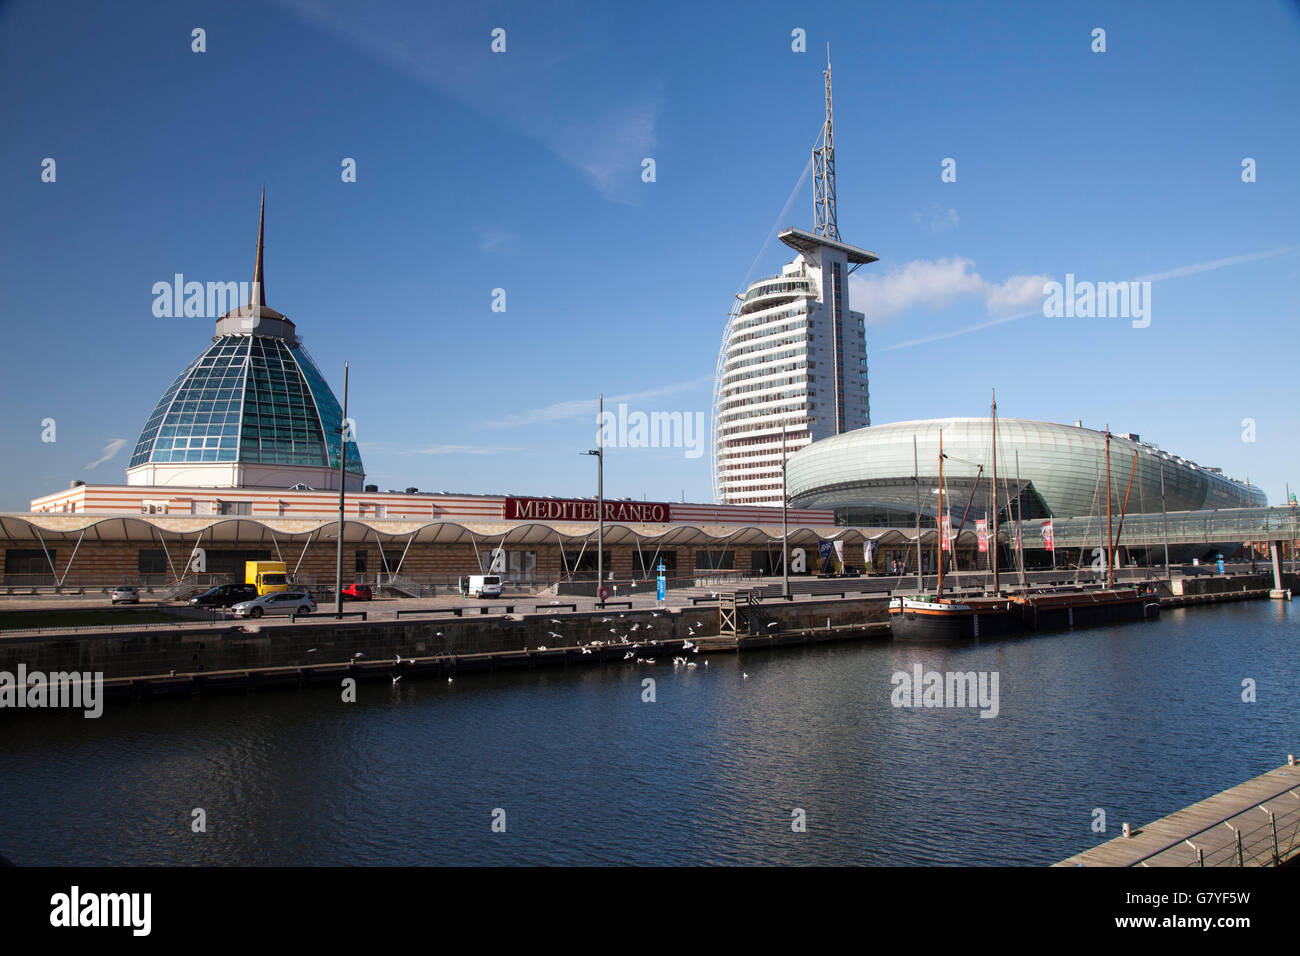 Klimahaus building, Mediterraneo shopping mall, Conference Center, Sail City, Havenwelten, Bremerhaven, Weser River Stock Photo